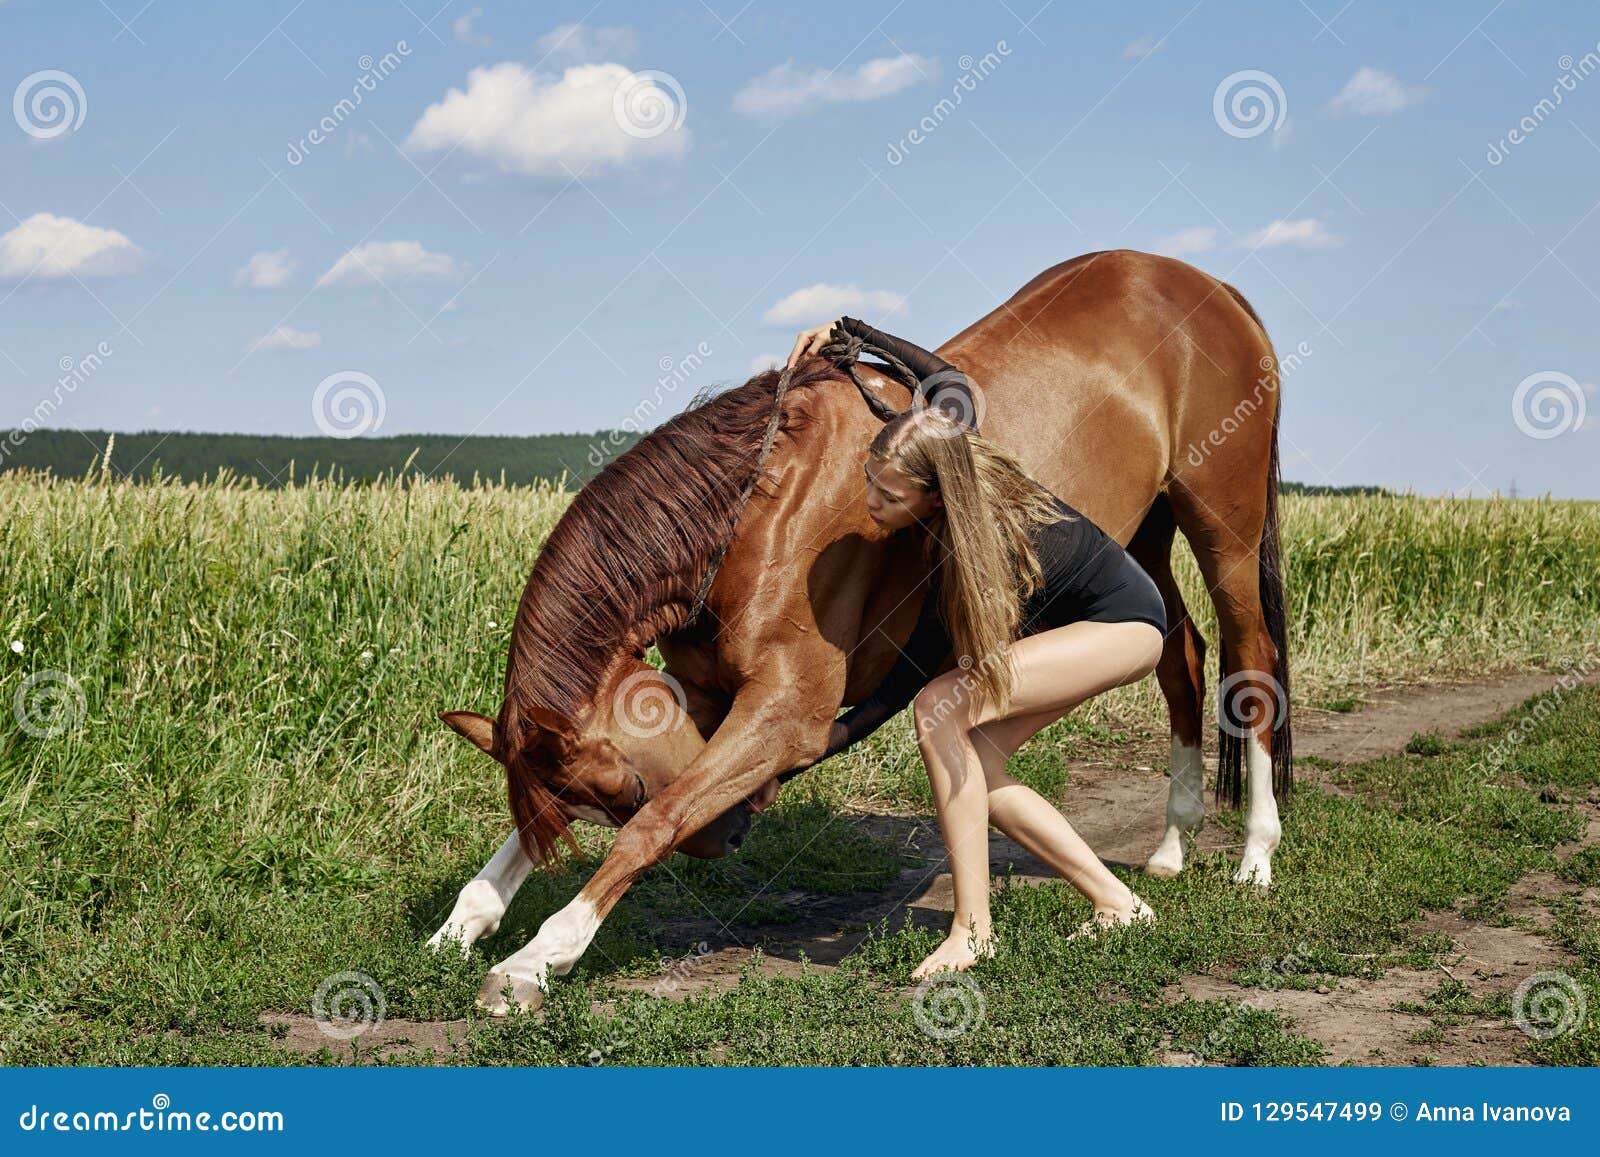 Women and horse mating